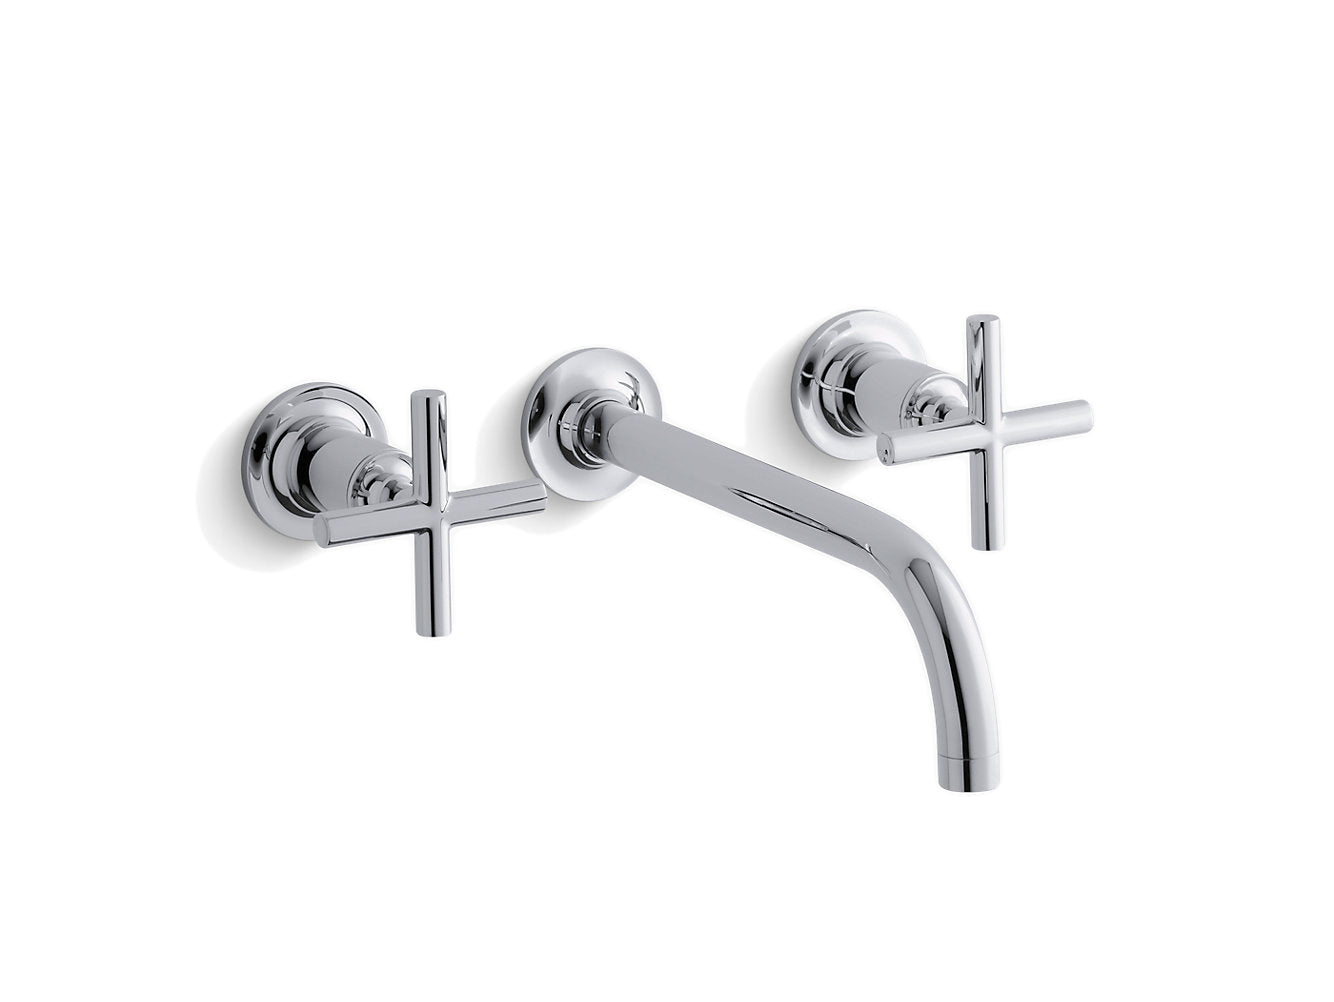 Kohler Purist Wall Mount Bathroom Sink Faucet Trim With 9" 90-degree Angle Spout and Cross Handles Requires Valve - Chrome